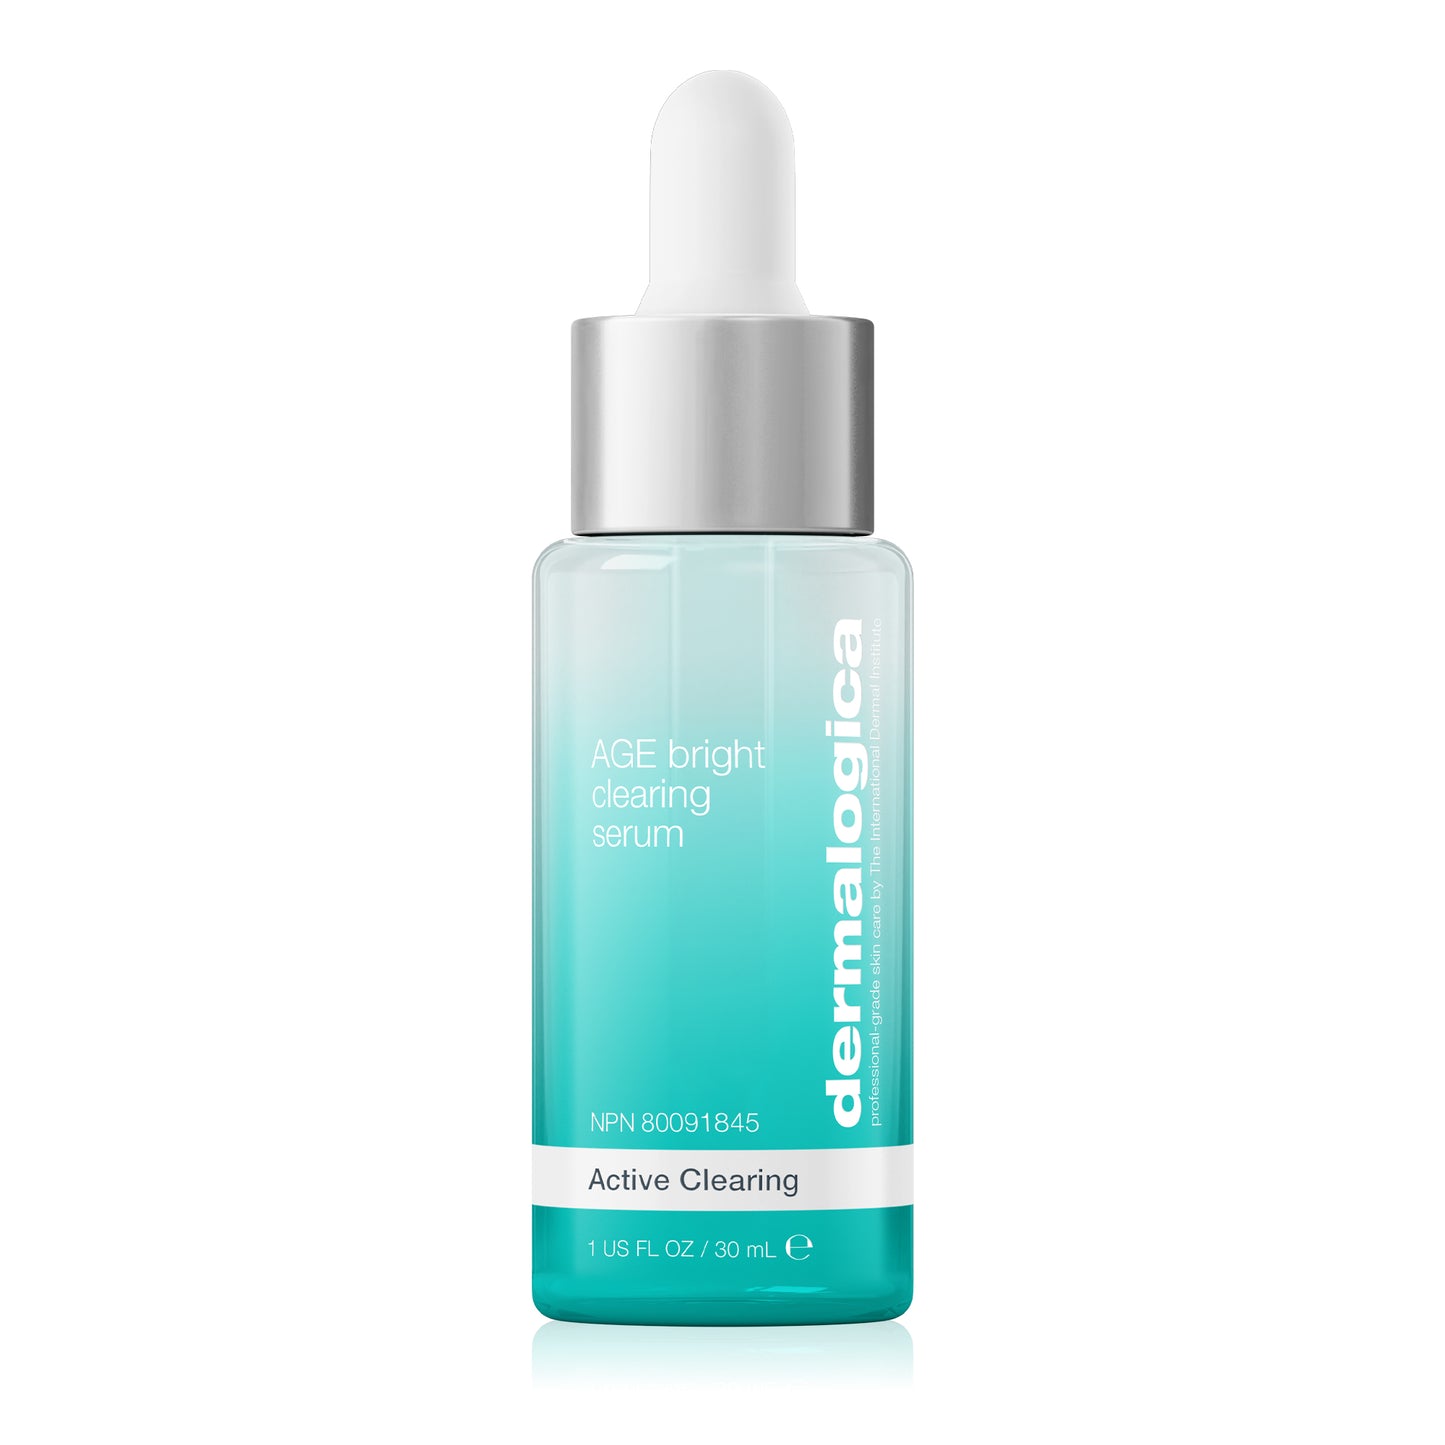 Age bright clearing serum product bottle.